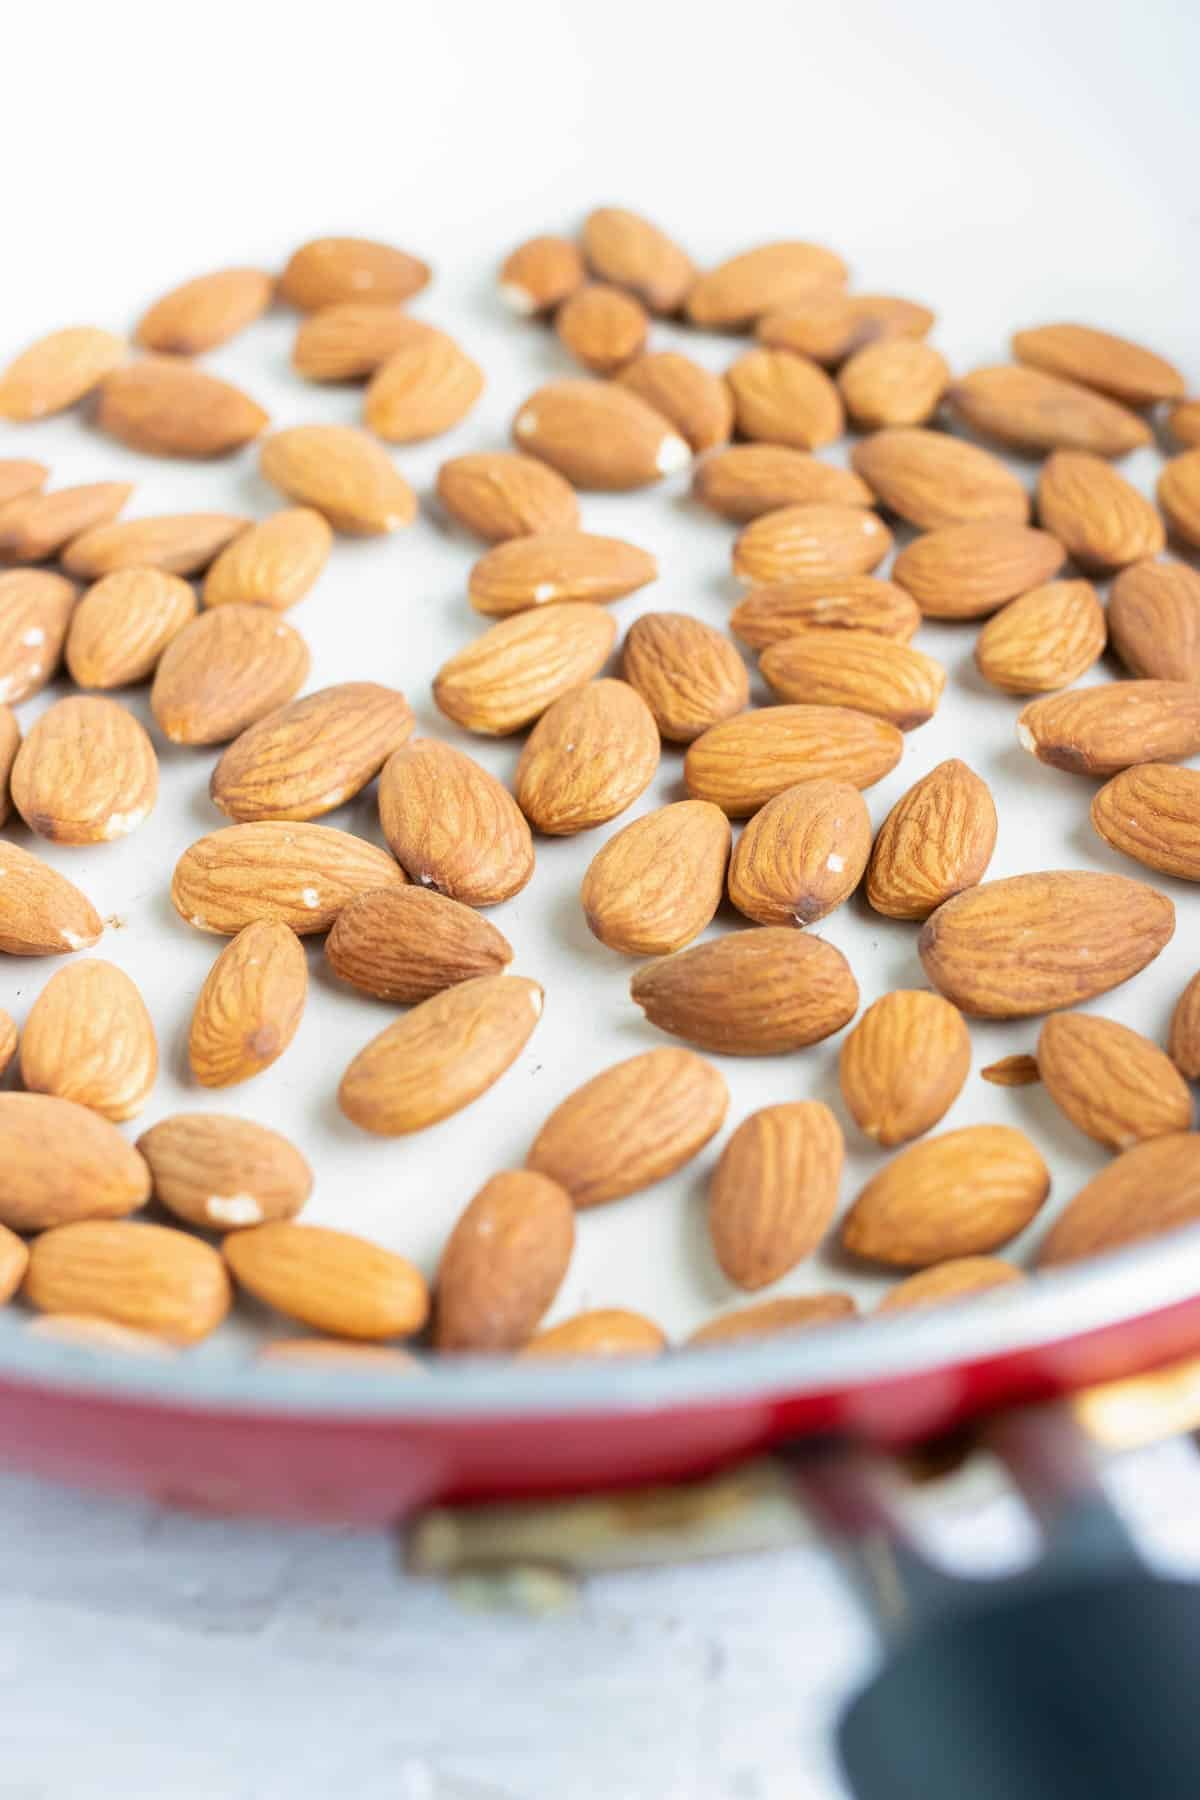 Almonds placed on a parchment paper lined baking sheet.